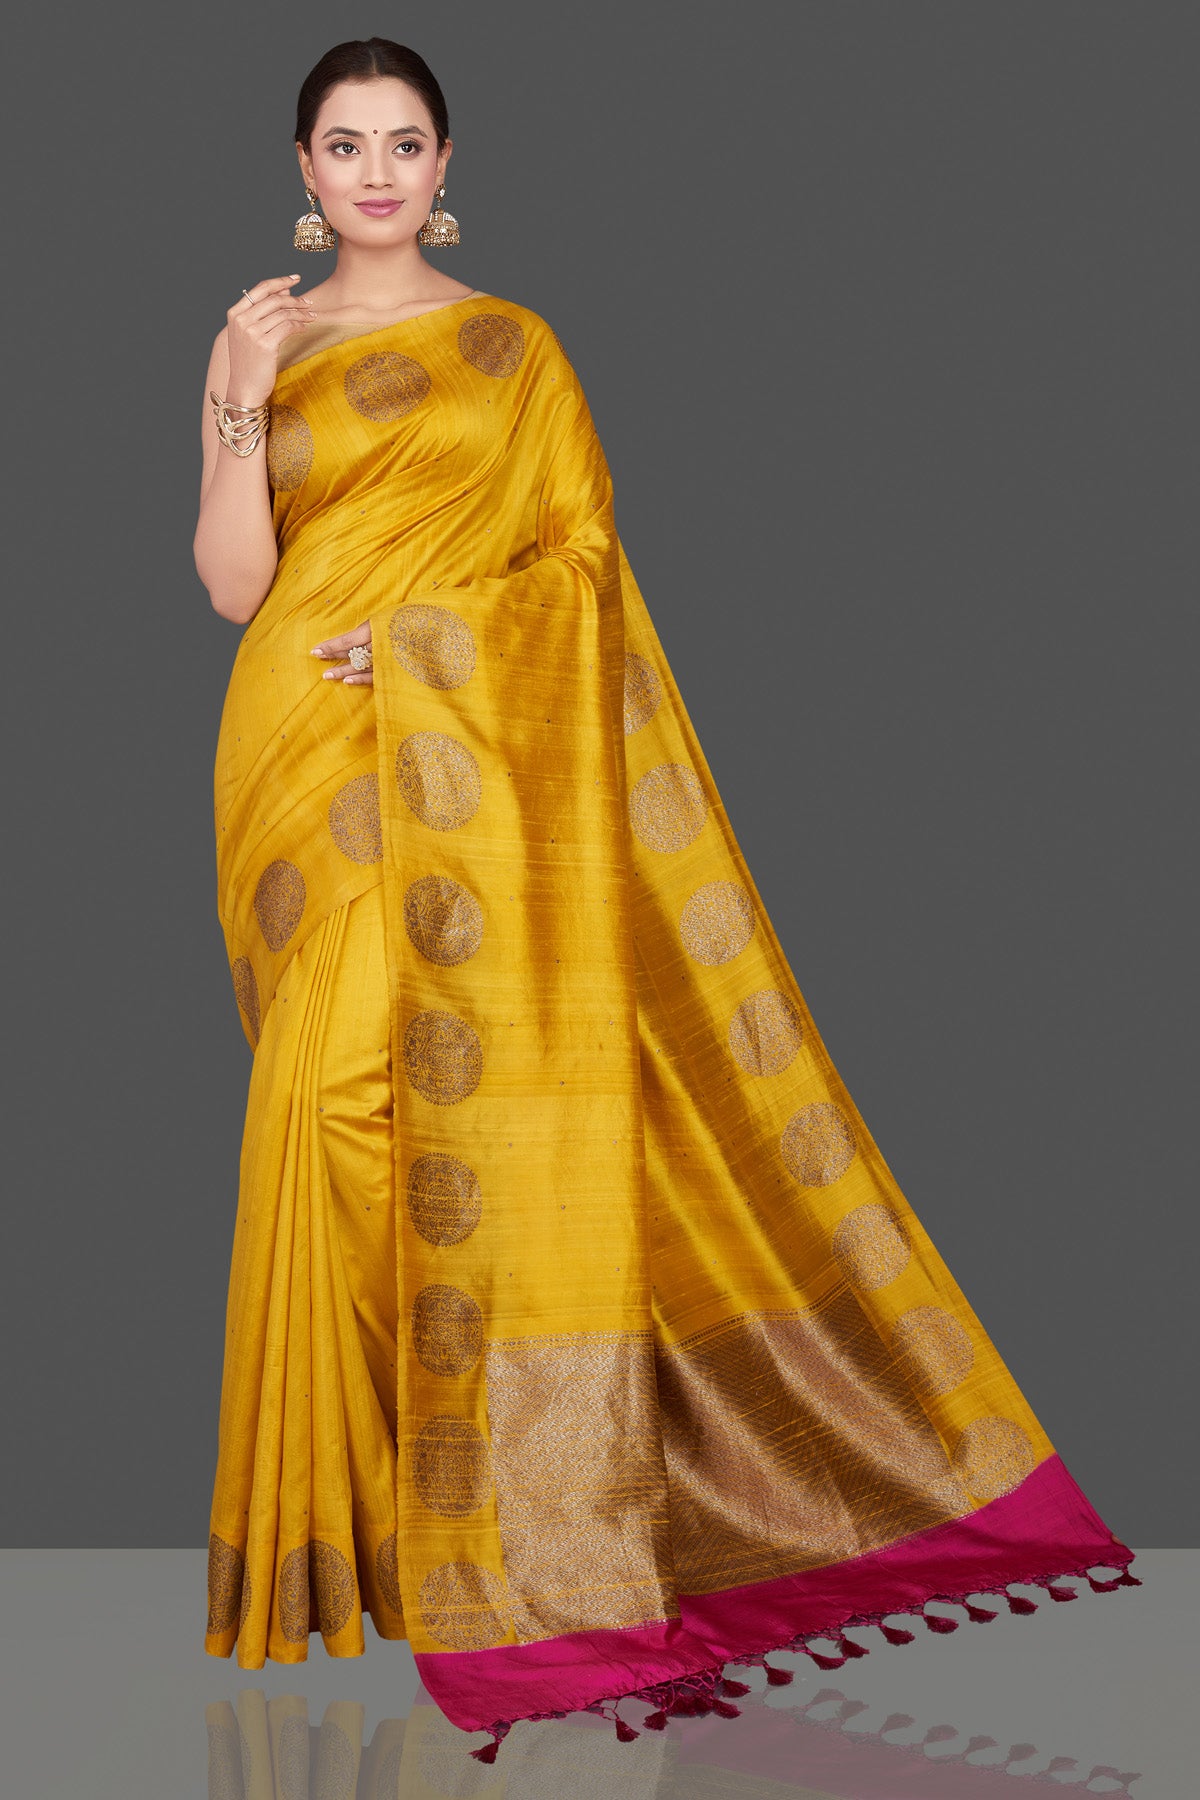 Shop gorgeous yellow tussar Banarasi saree online in USA with zari buta border. Go for stunning Indian designer sarees, georgette sarees, handwoven saris, embroidered sarees for festive occasions and weddings from Pure Elegance Indian clothing store in USA.-full view